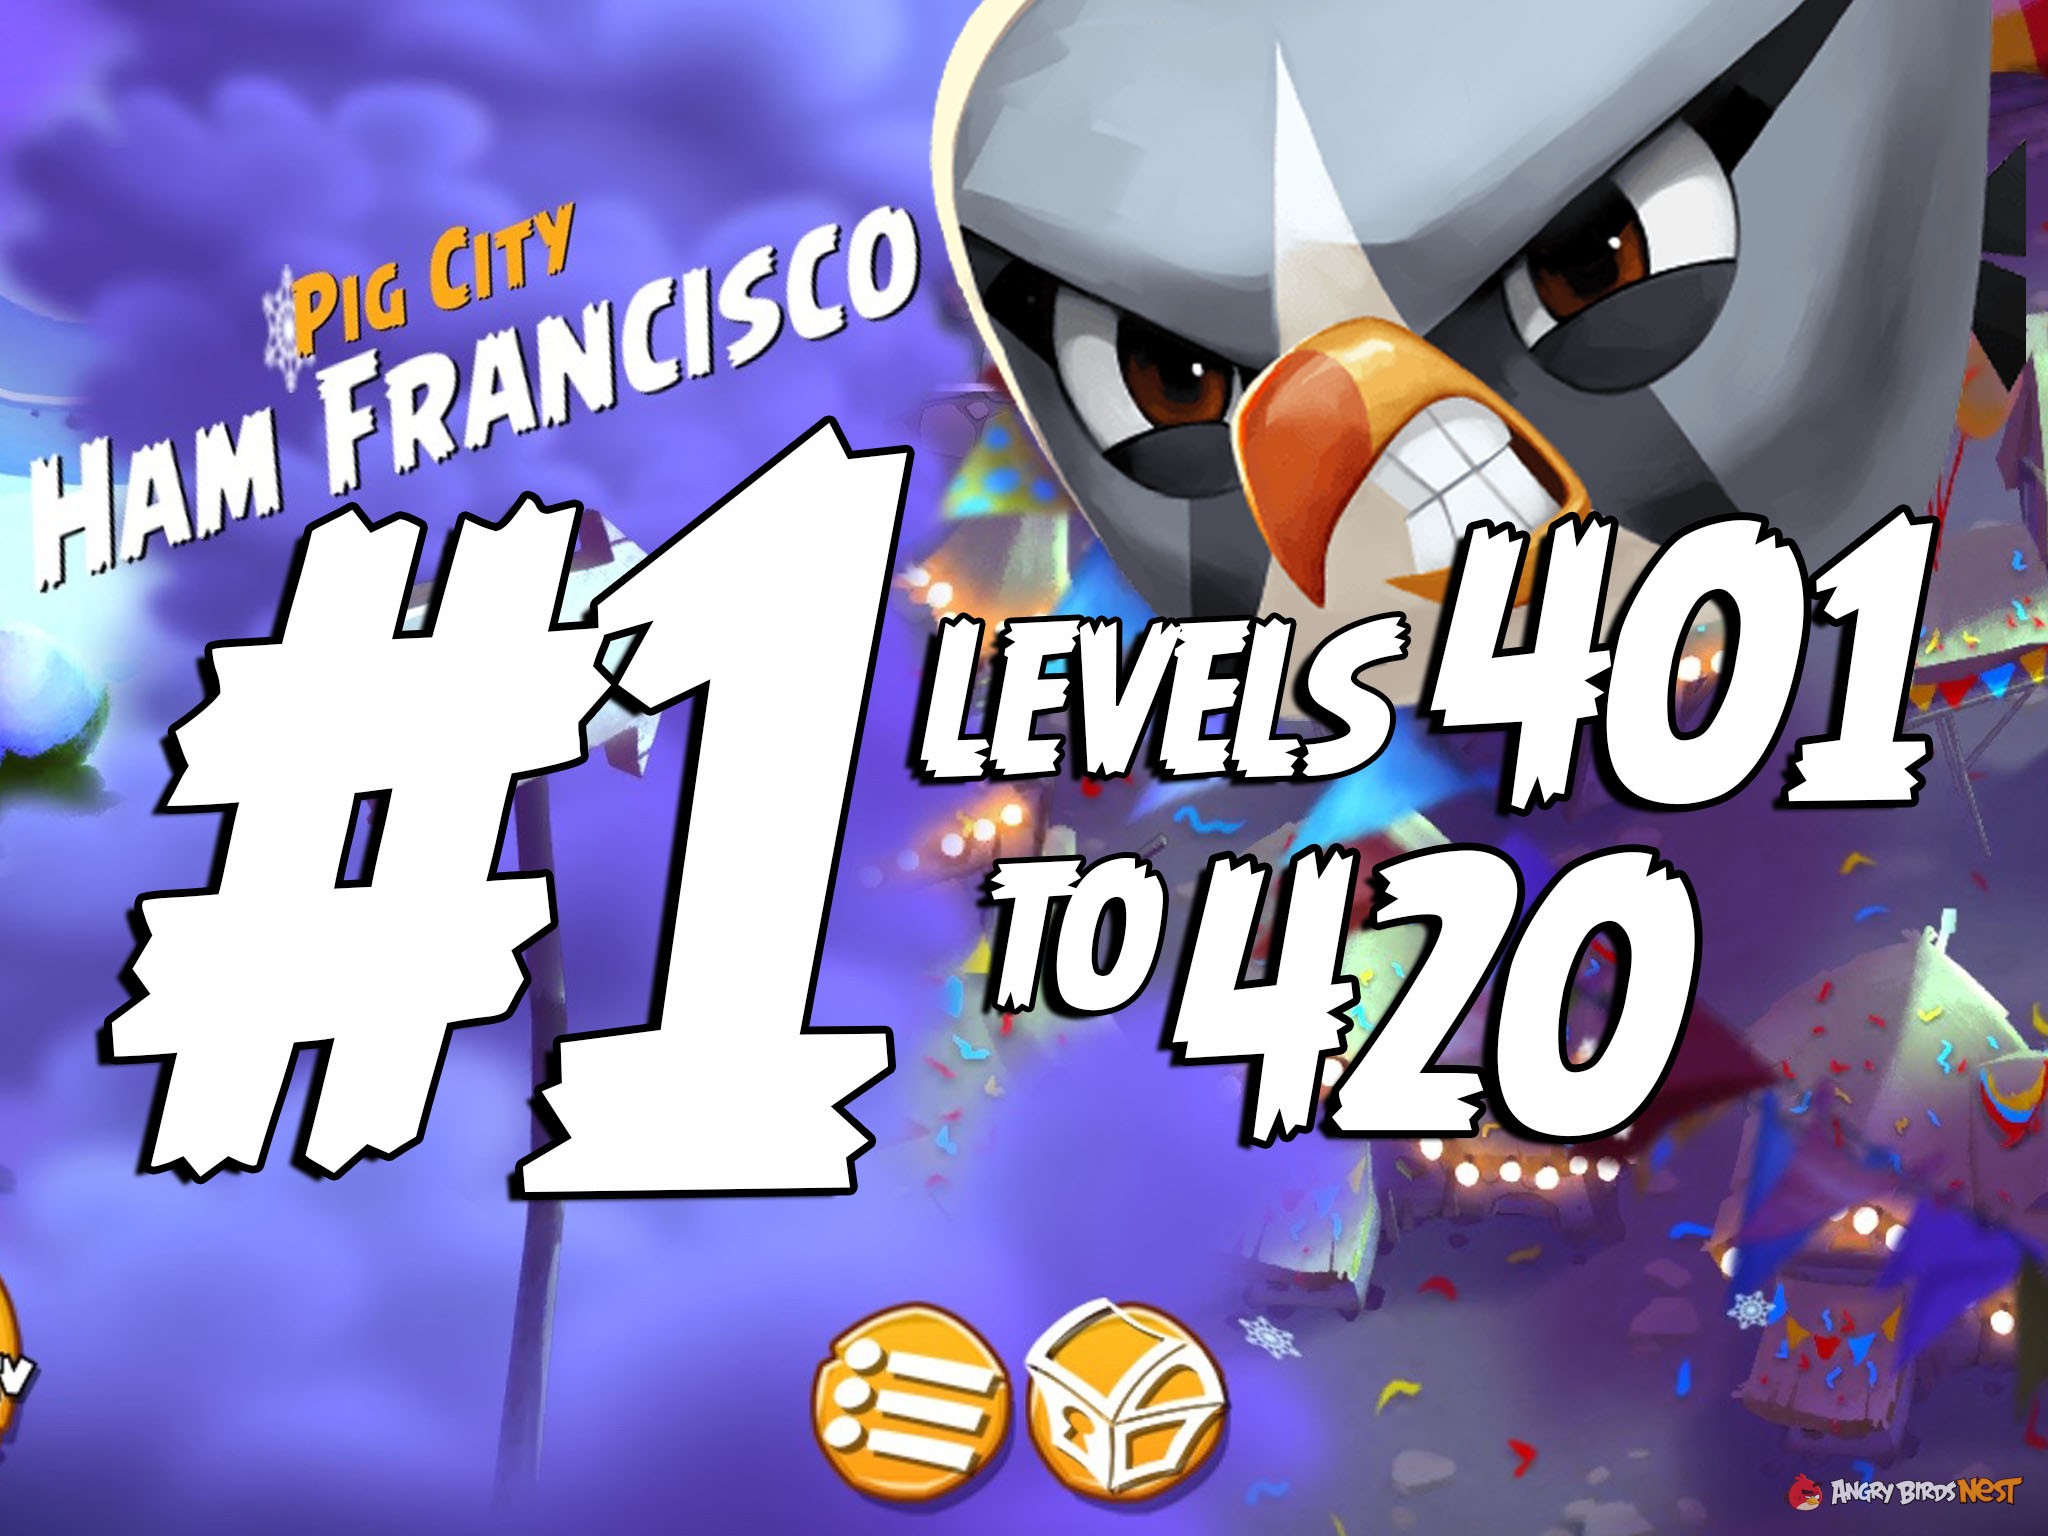 Angry Birds 2 Pig City Ham Francisco Levels 401 to 420